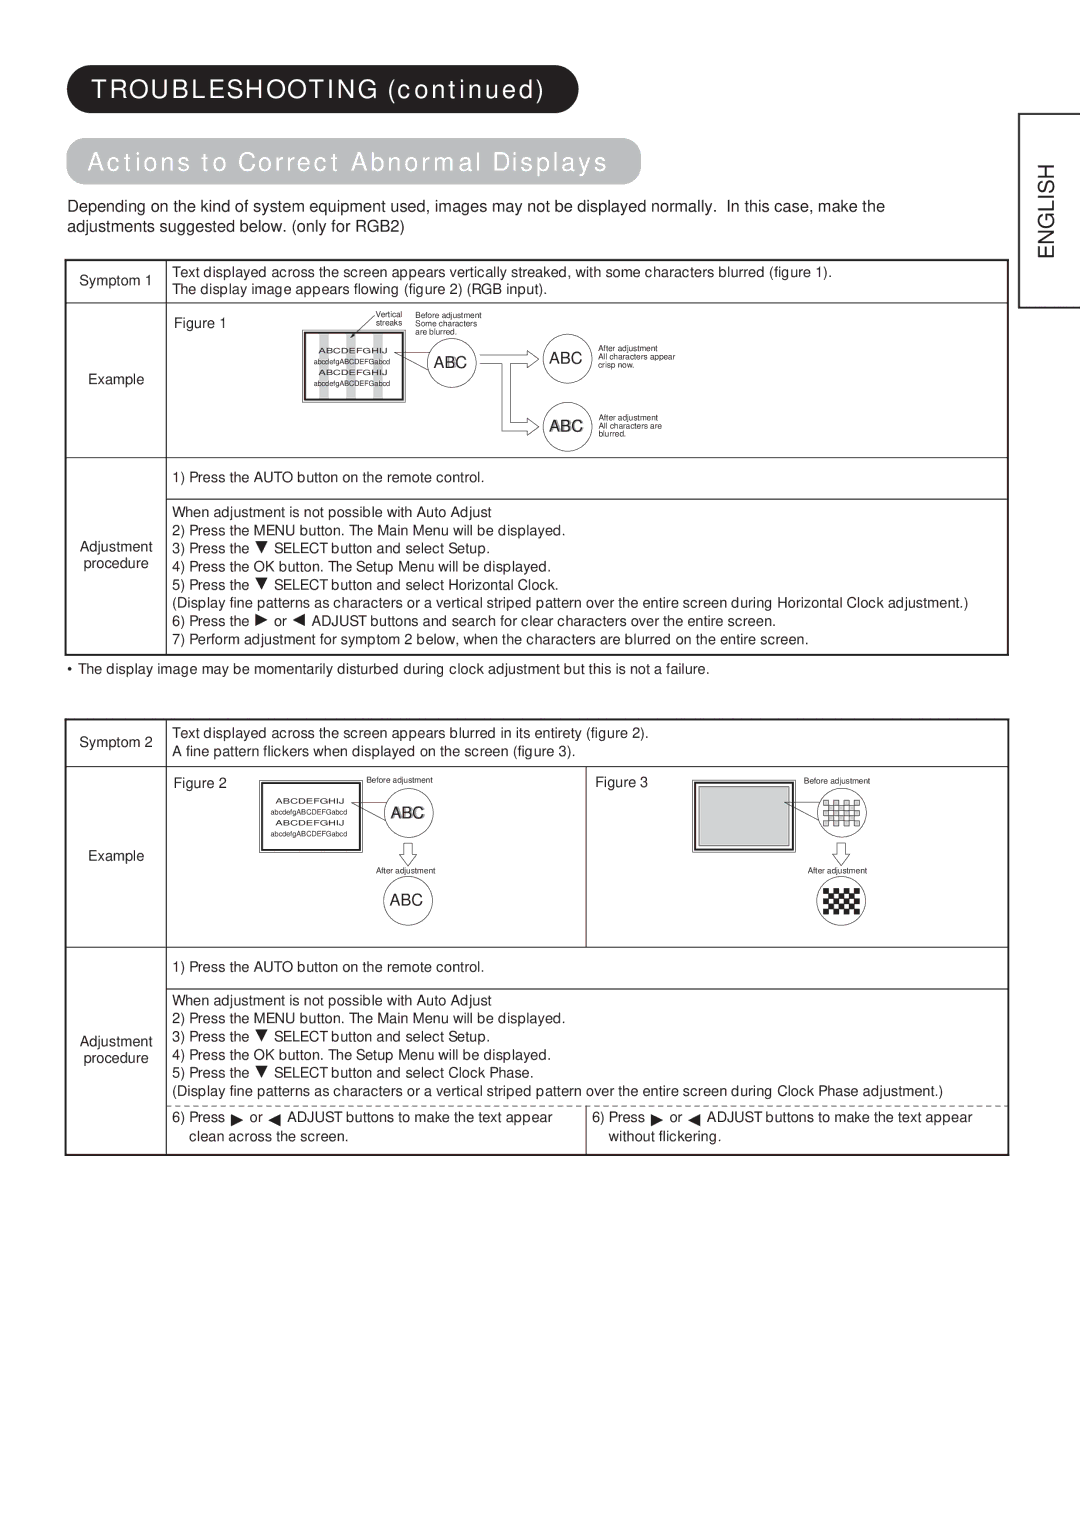 Hitachi CMP4212, CMP4211 user manual Troubleshooting Actions to Correct Abnormal Displays, Example 